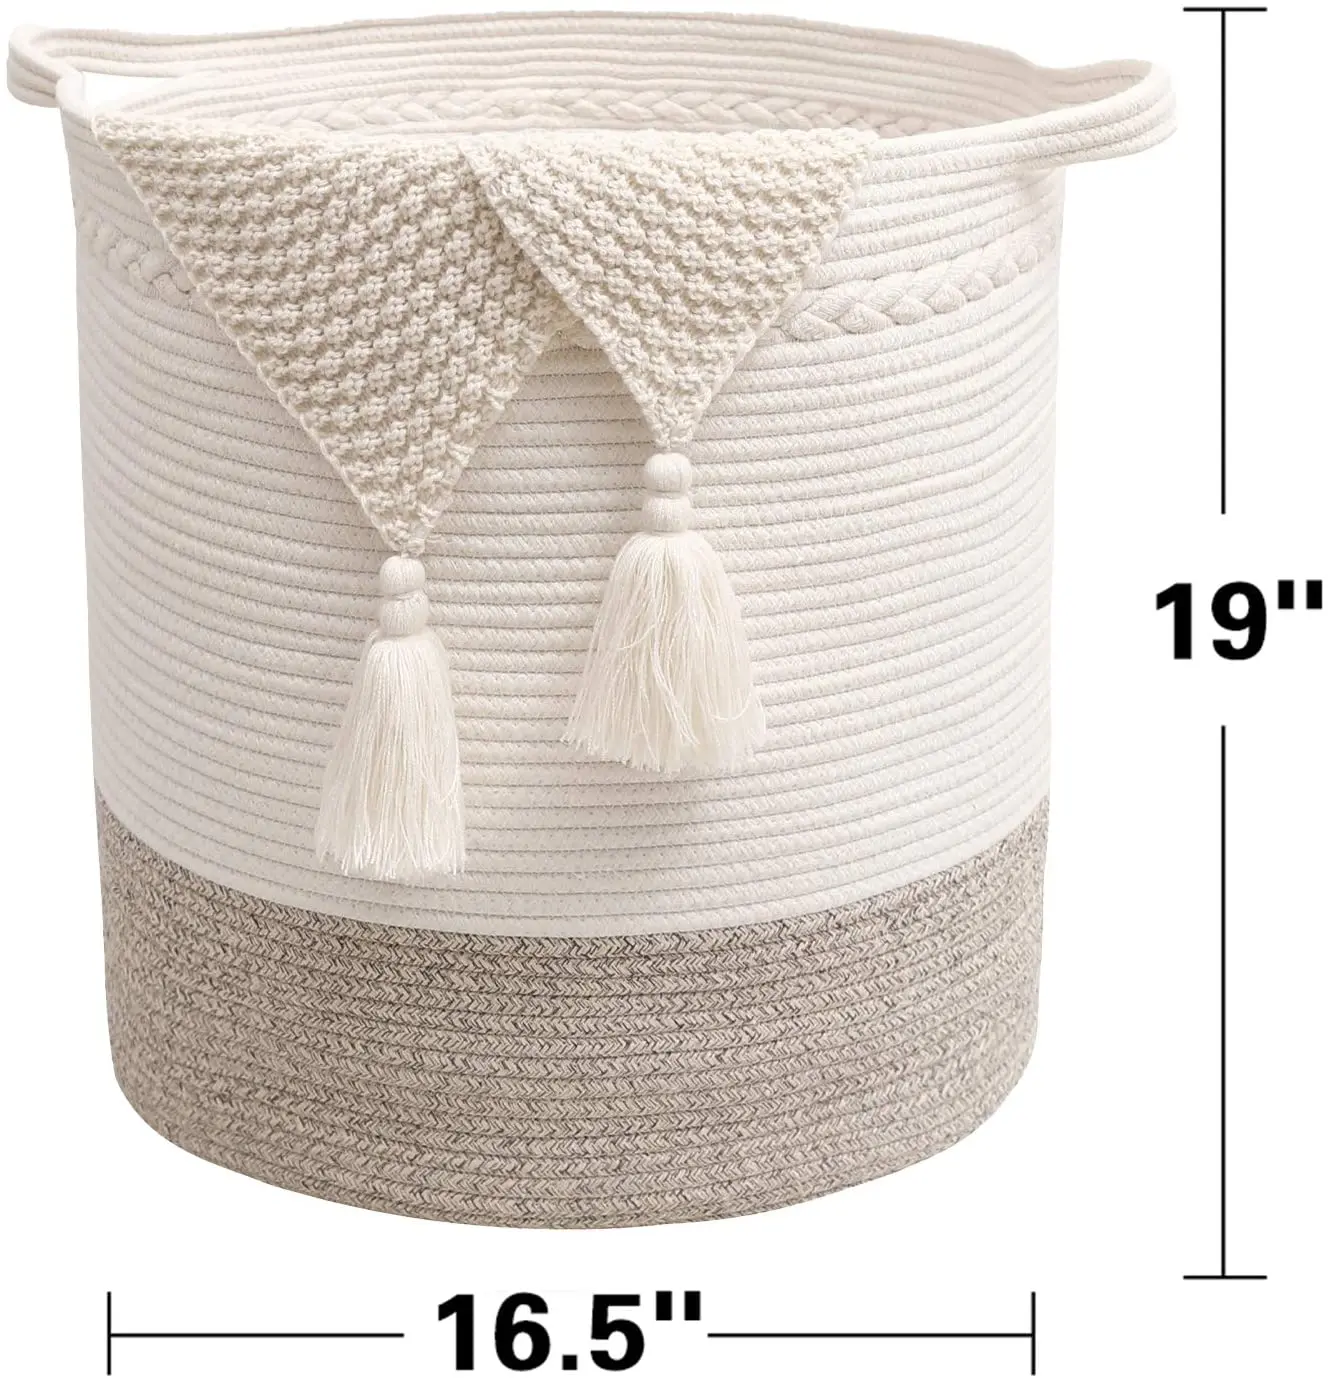 AELS XXXLarge 22x15 Rope Boho Basket Woven Baby Laundry Basket for Blankets Toys Storage Basket with Handle Comforter Cushions Storage Bins Thread Laundry Hamper-Brown White Gray 